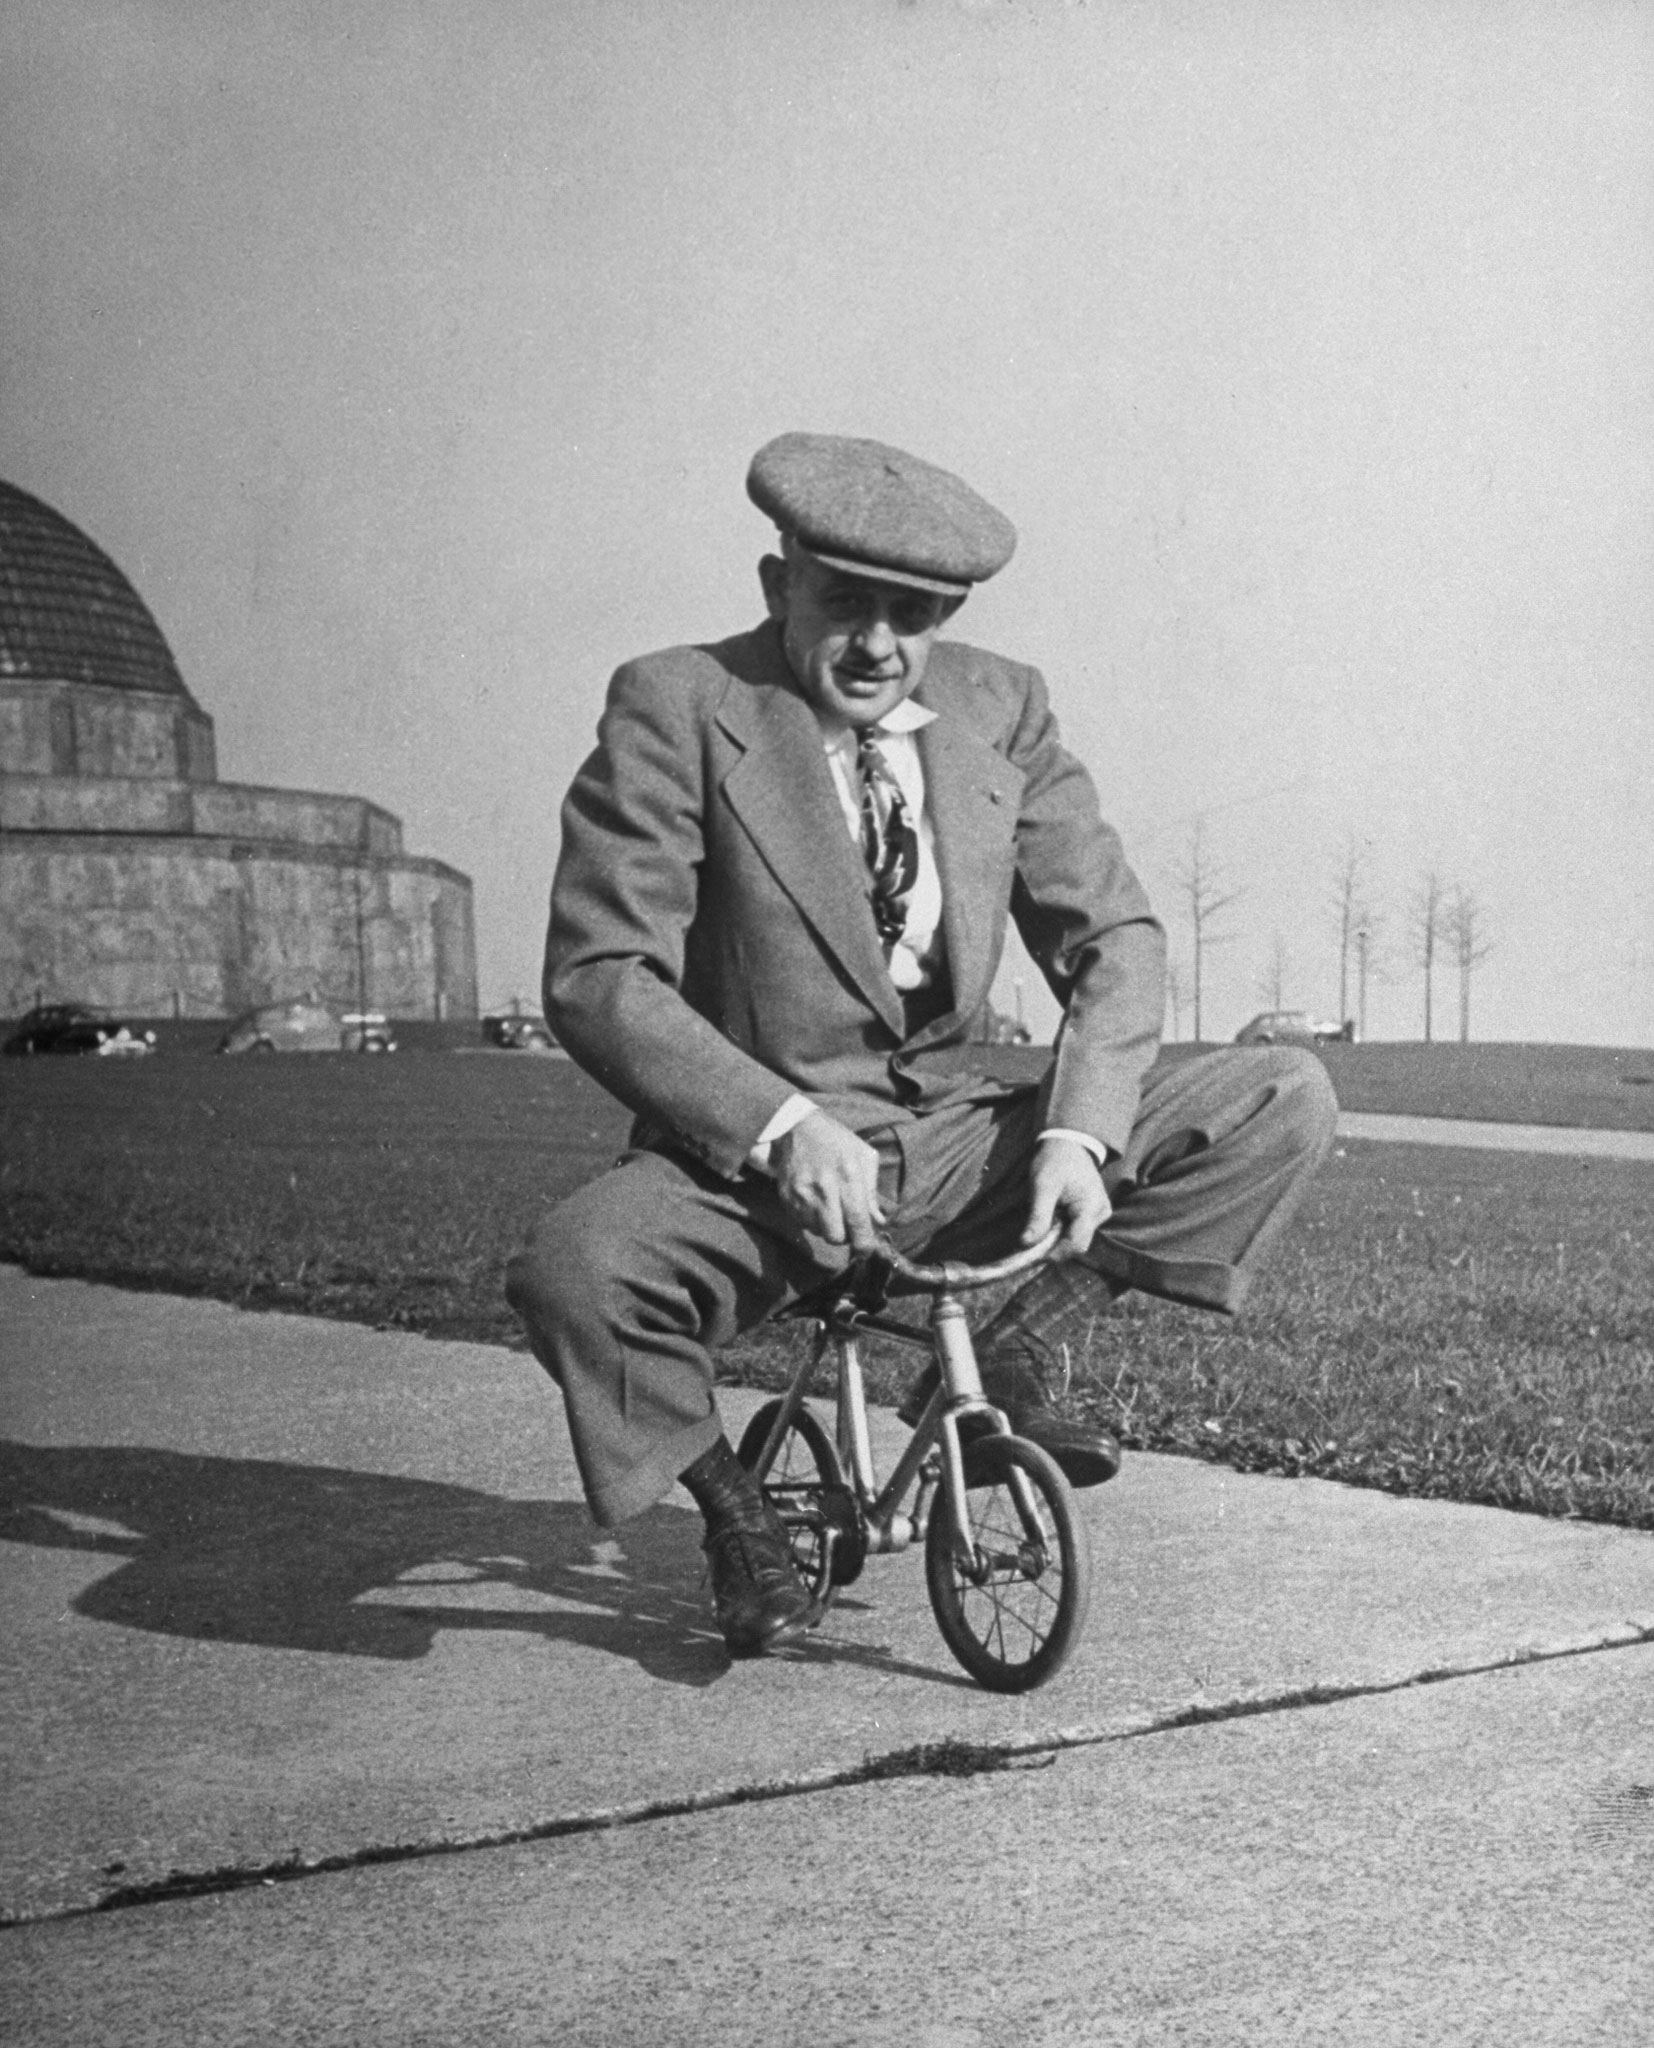 Chicago bicycle dealer Andy Koslow rides a tiny bike built by a former vaudevillian. "This helps limber up his left leg," LIFE wrote, "which, as a former motorcycle racer, he broke seven times."